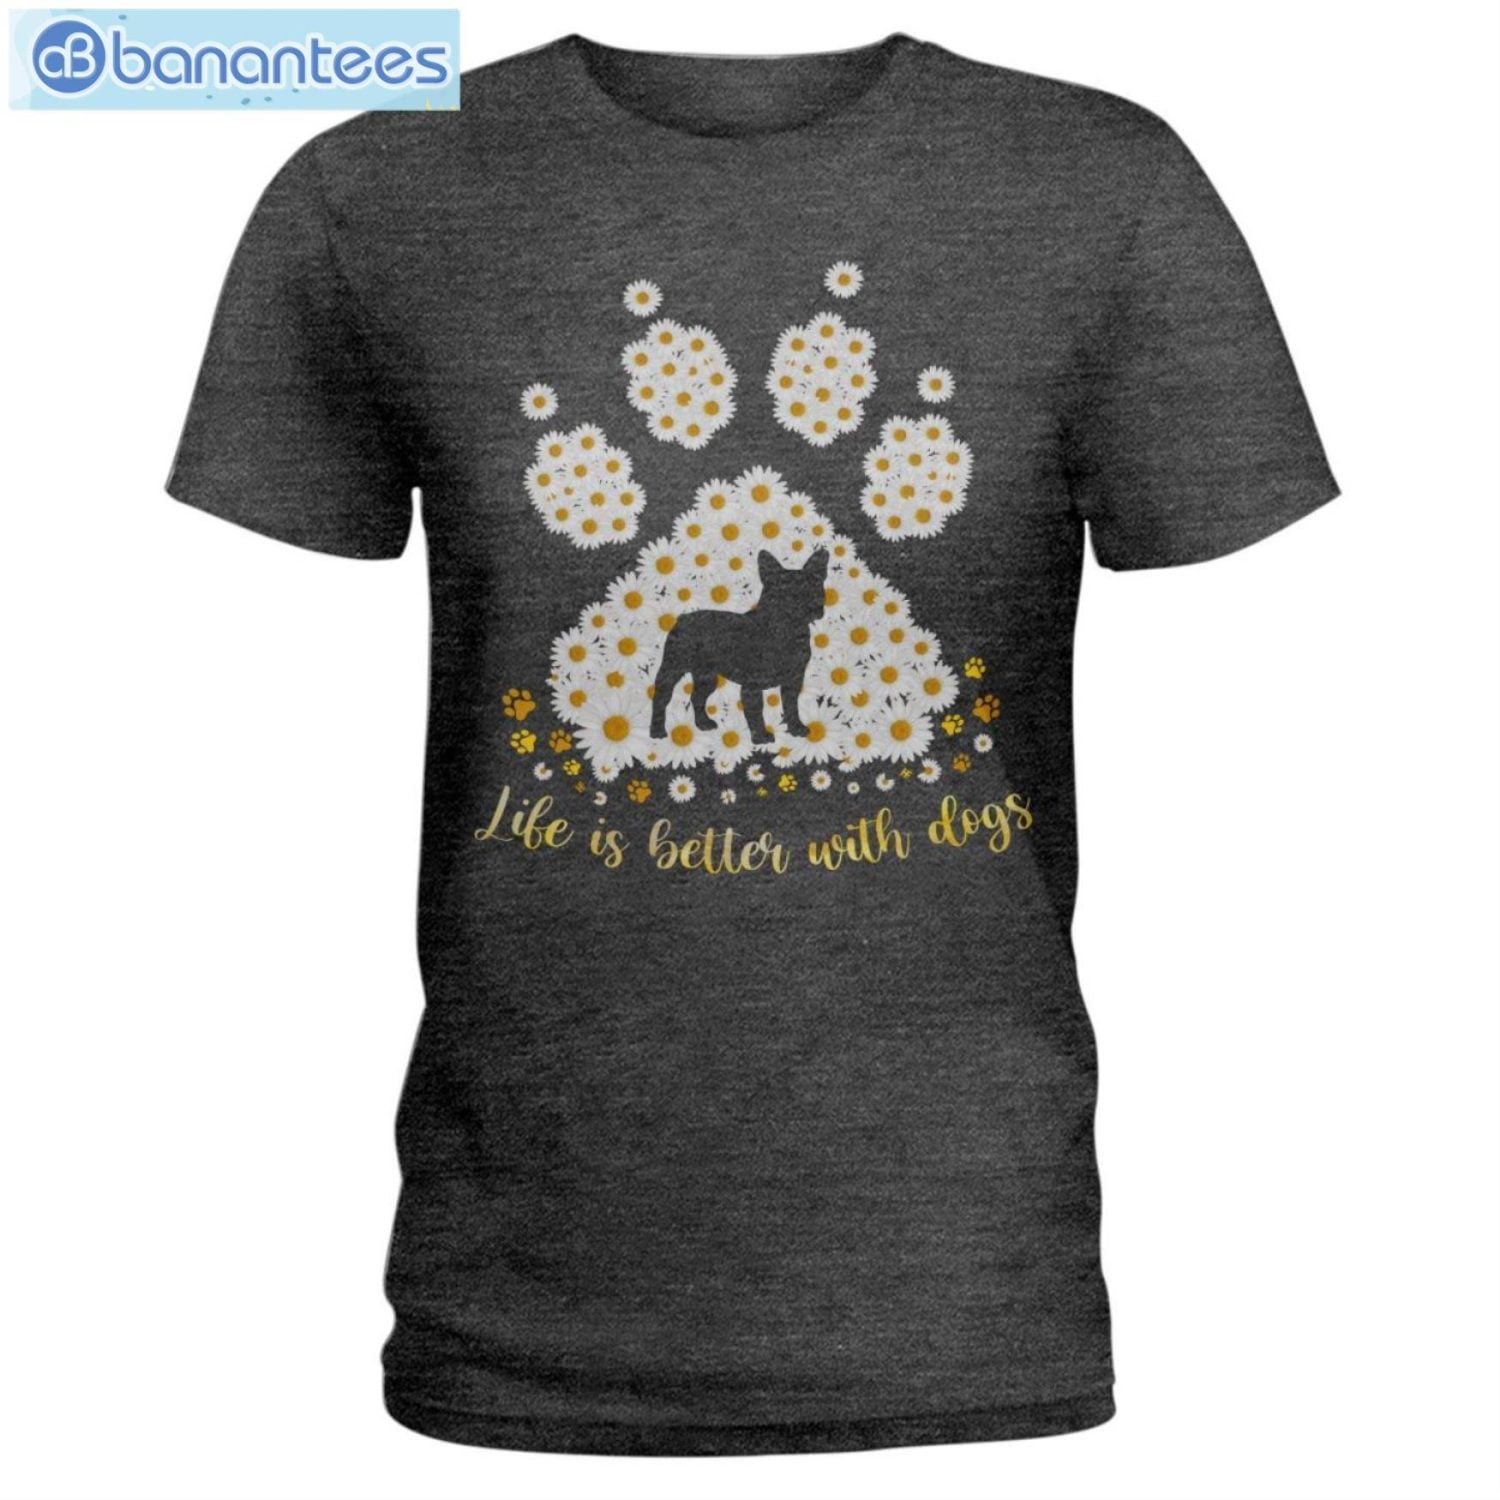 French Bulldog Daisy Life Is Better With Dogs T-Shirt Long Sleeve Tee Product Photo 2 Product photo 2